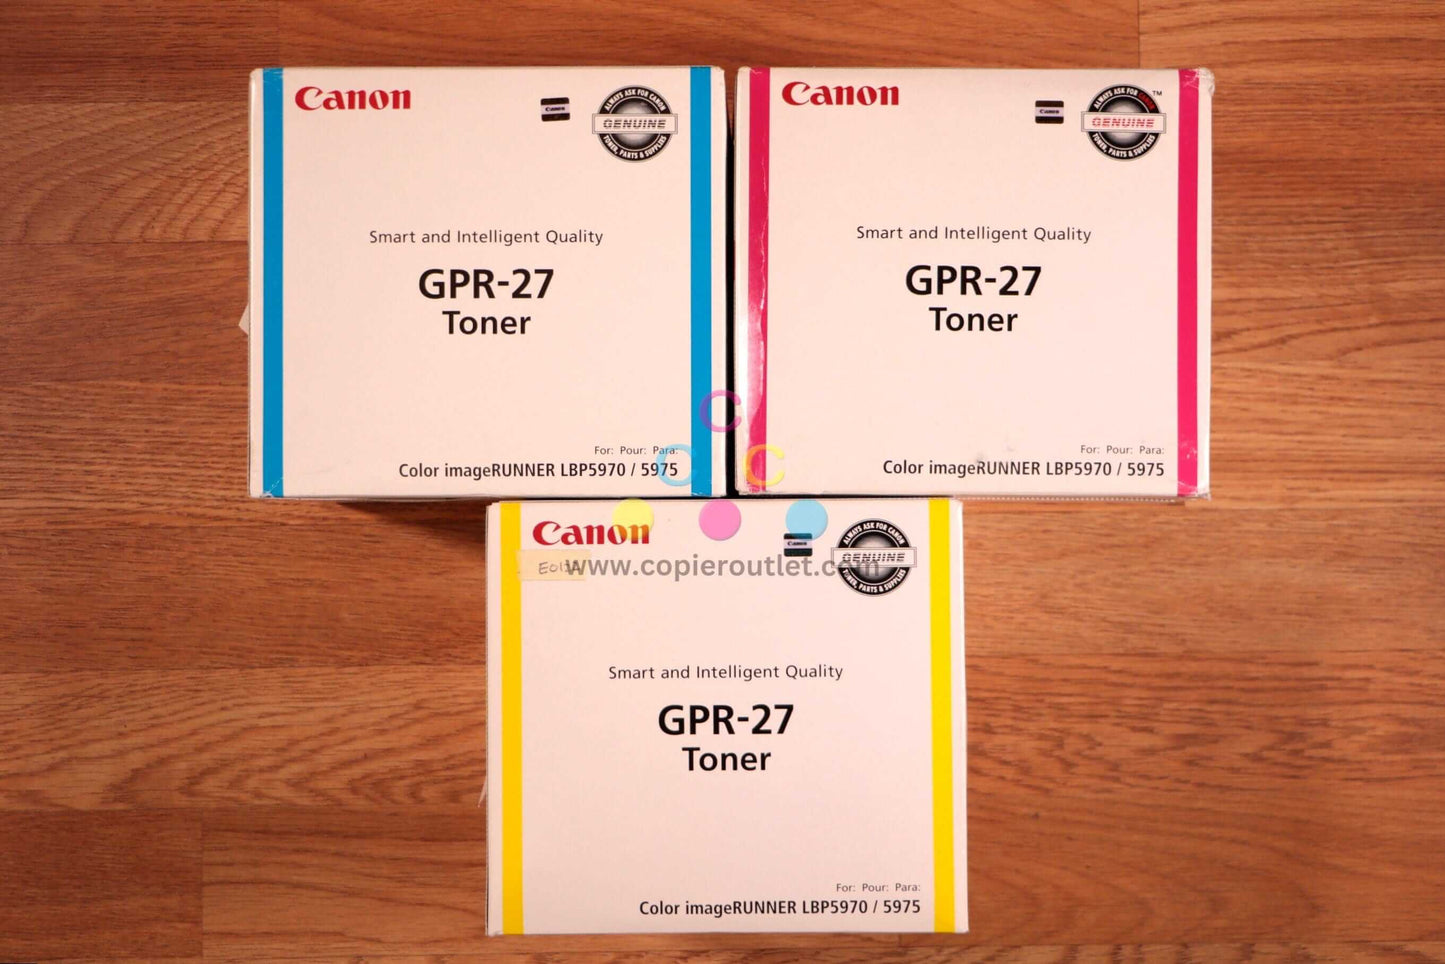 Lot of 3 Canon GPR-27 CMY Toner Cartridges iR LBP5970 / 5975 Same Day Shipping!! - copier-clearance-center